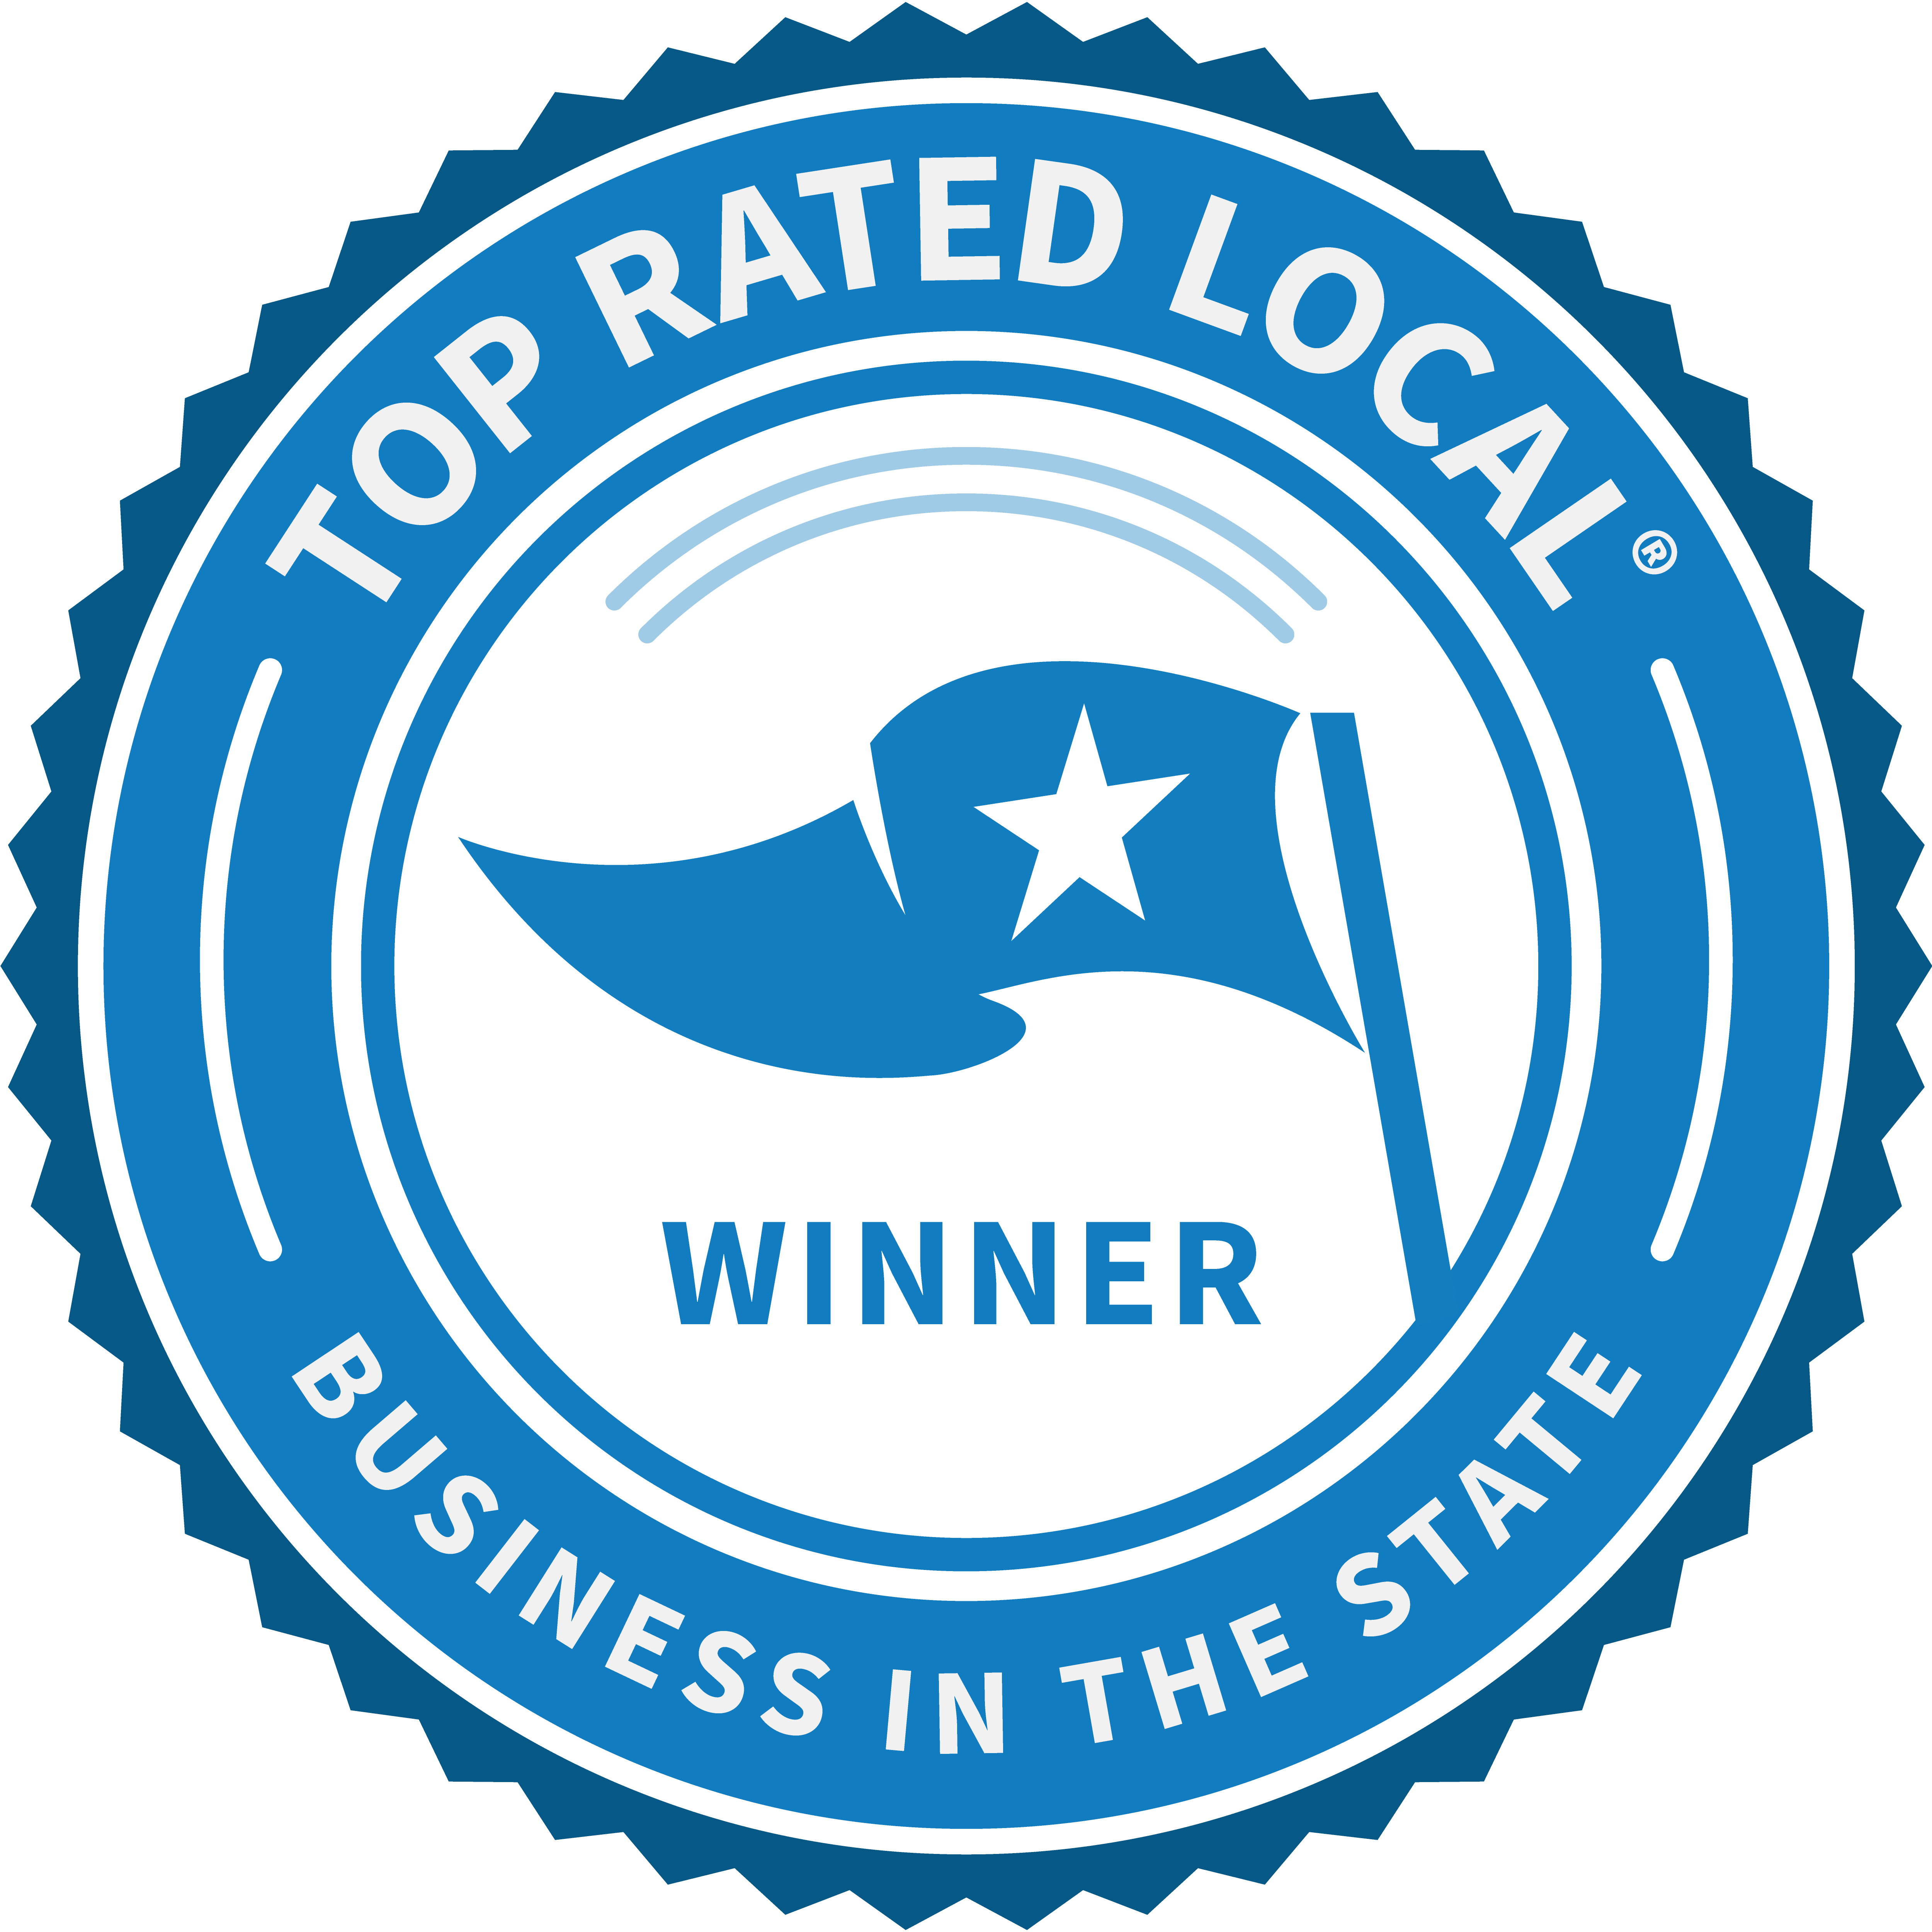 Top Rated Local Winner